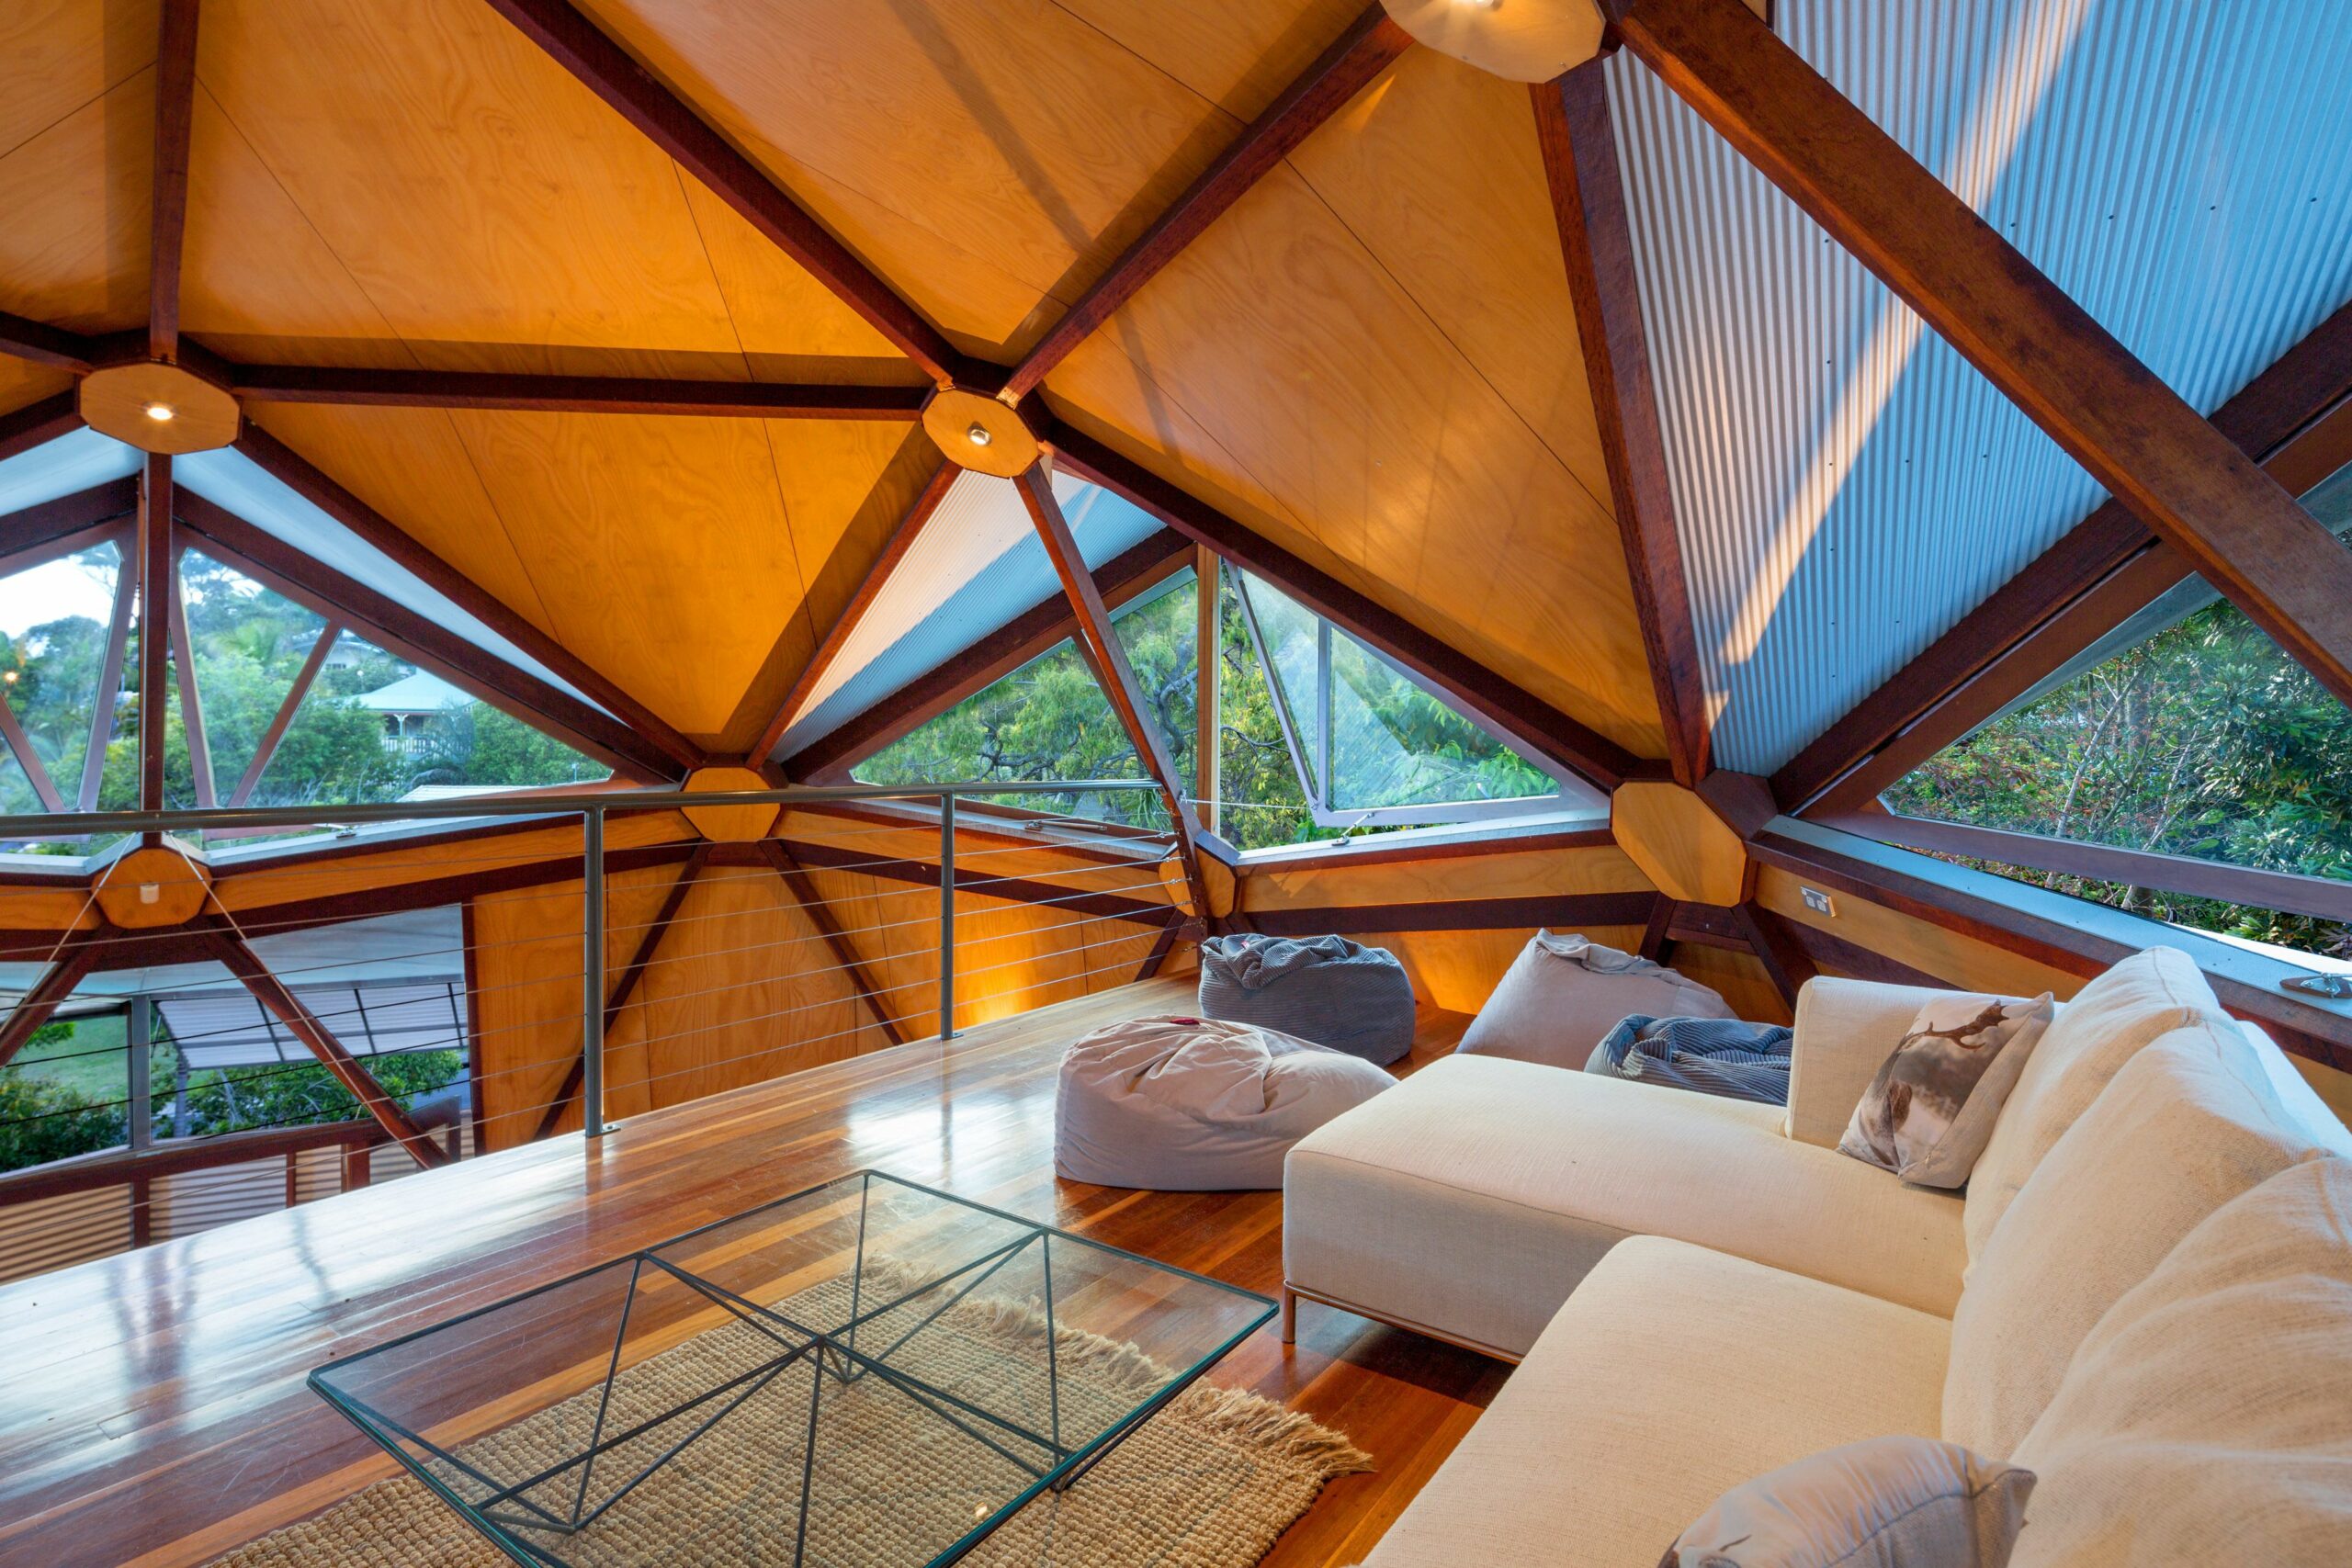 The Dome House